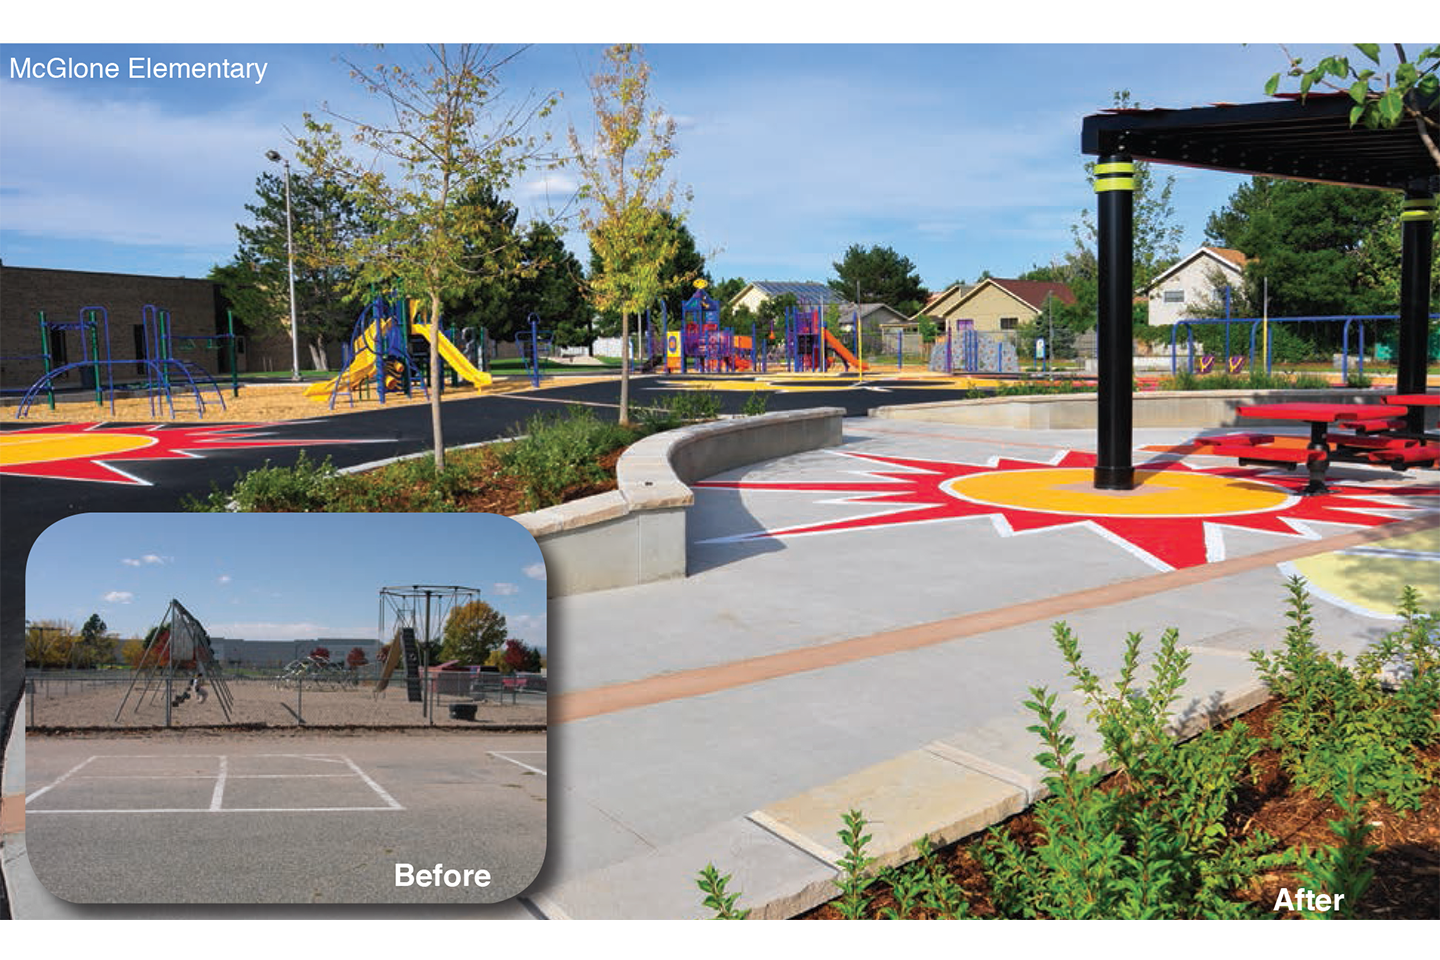 McGlone Elementary Playground before and after shots. The before image features a gravel playground with outdated swing sets, and the after image features a brightly covered pavilion, new play equipment, and improved surpaces.